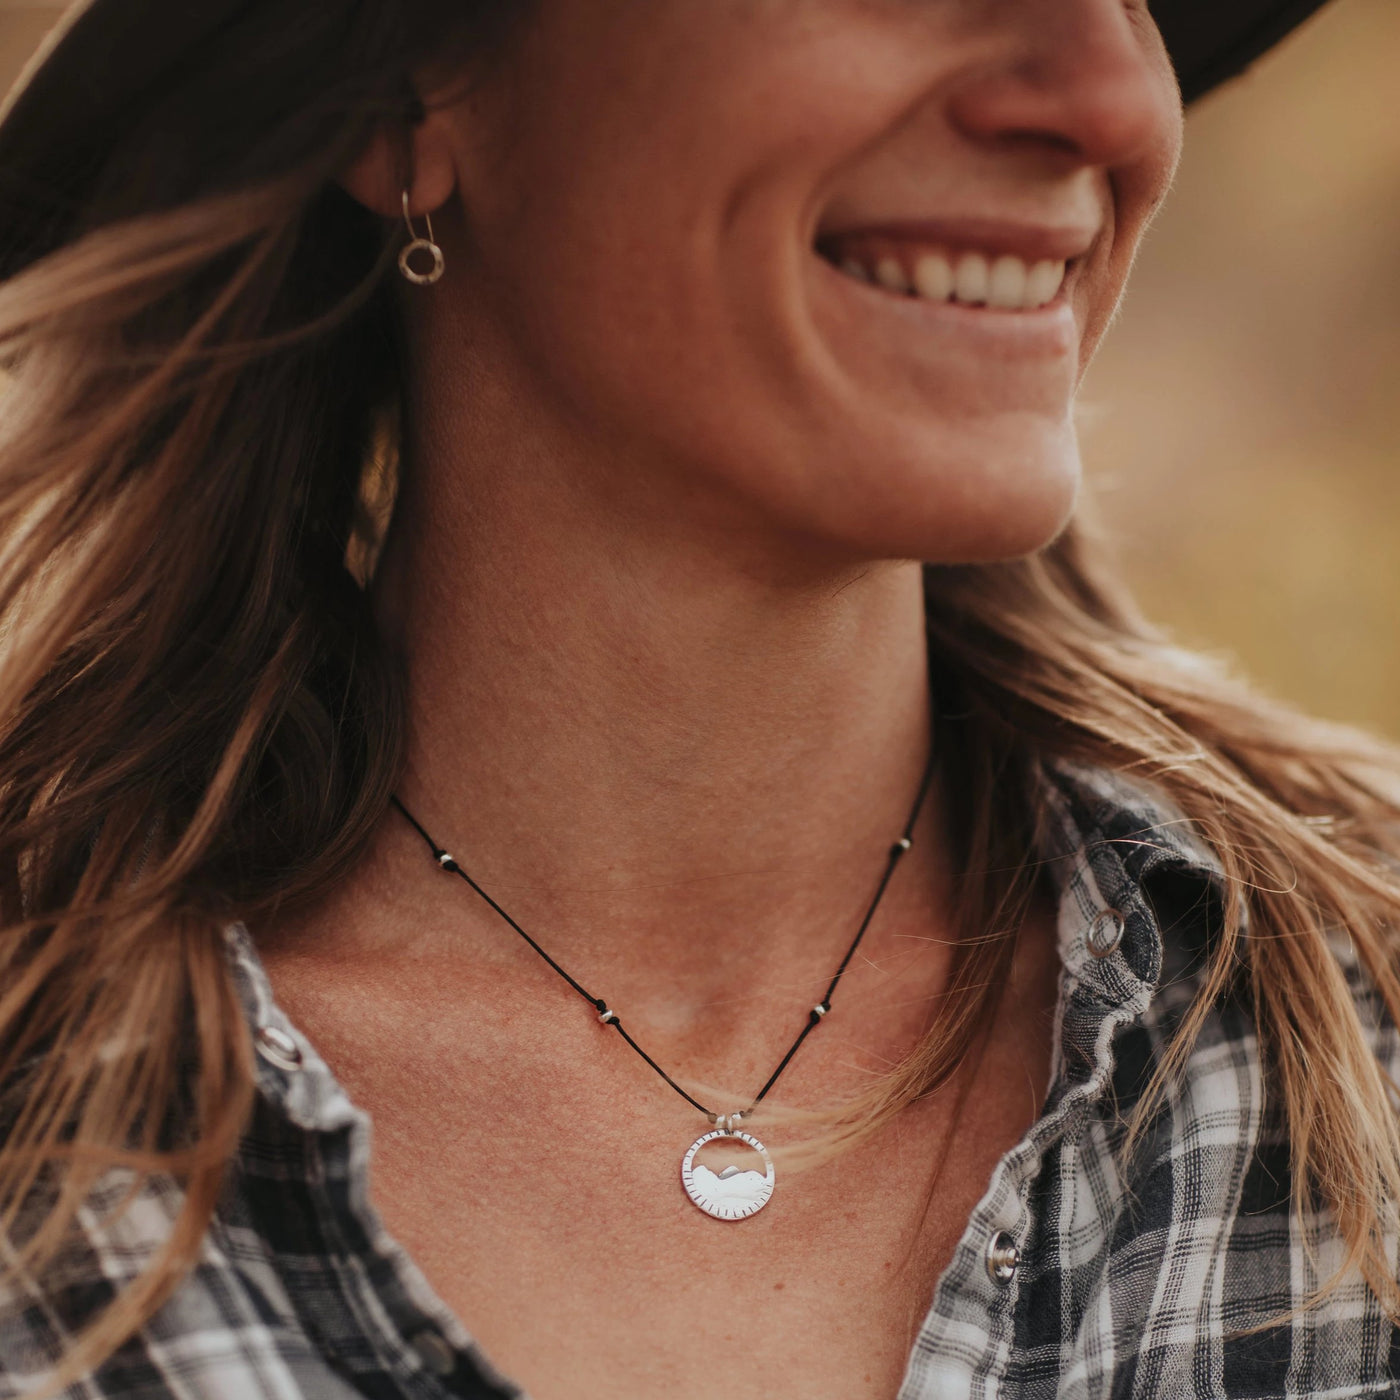 Our Three Sisters necklace is water worthy, strong and a Bronwen Jewelry favorite. Active jewelry for your active lifestyle.